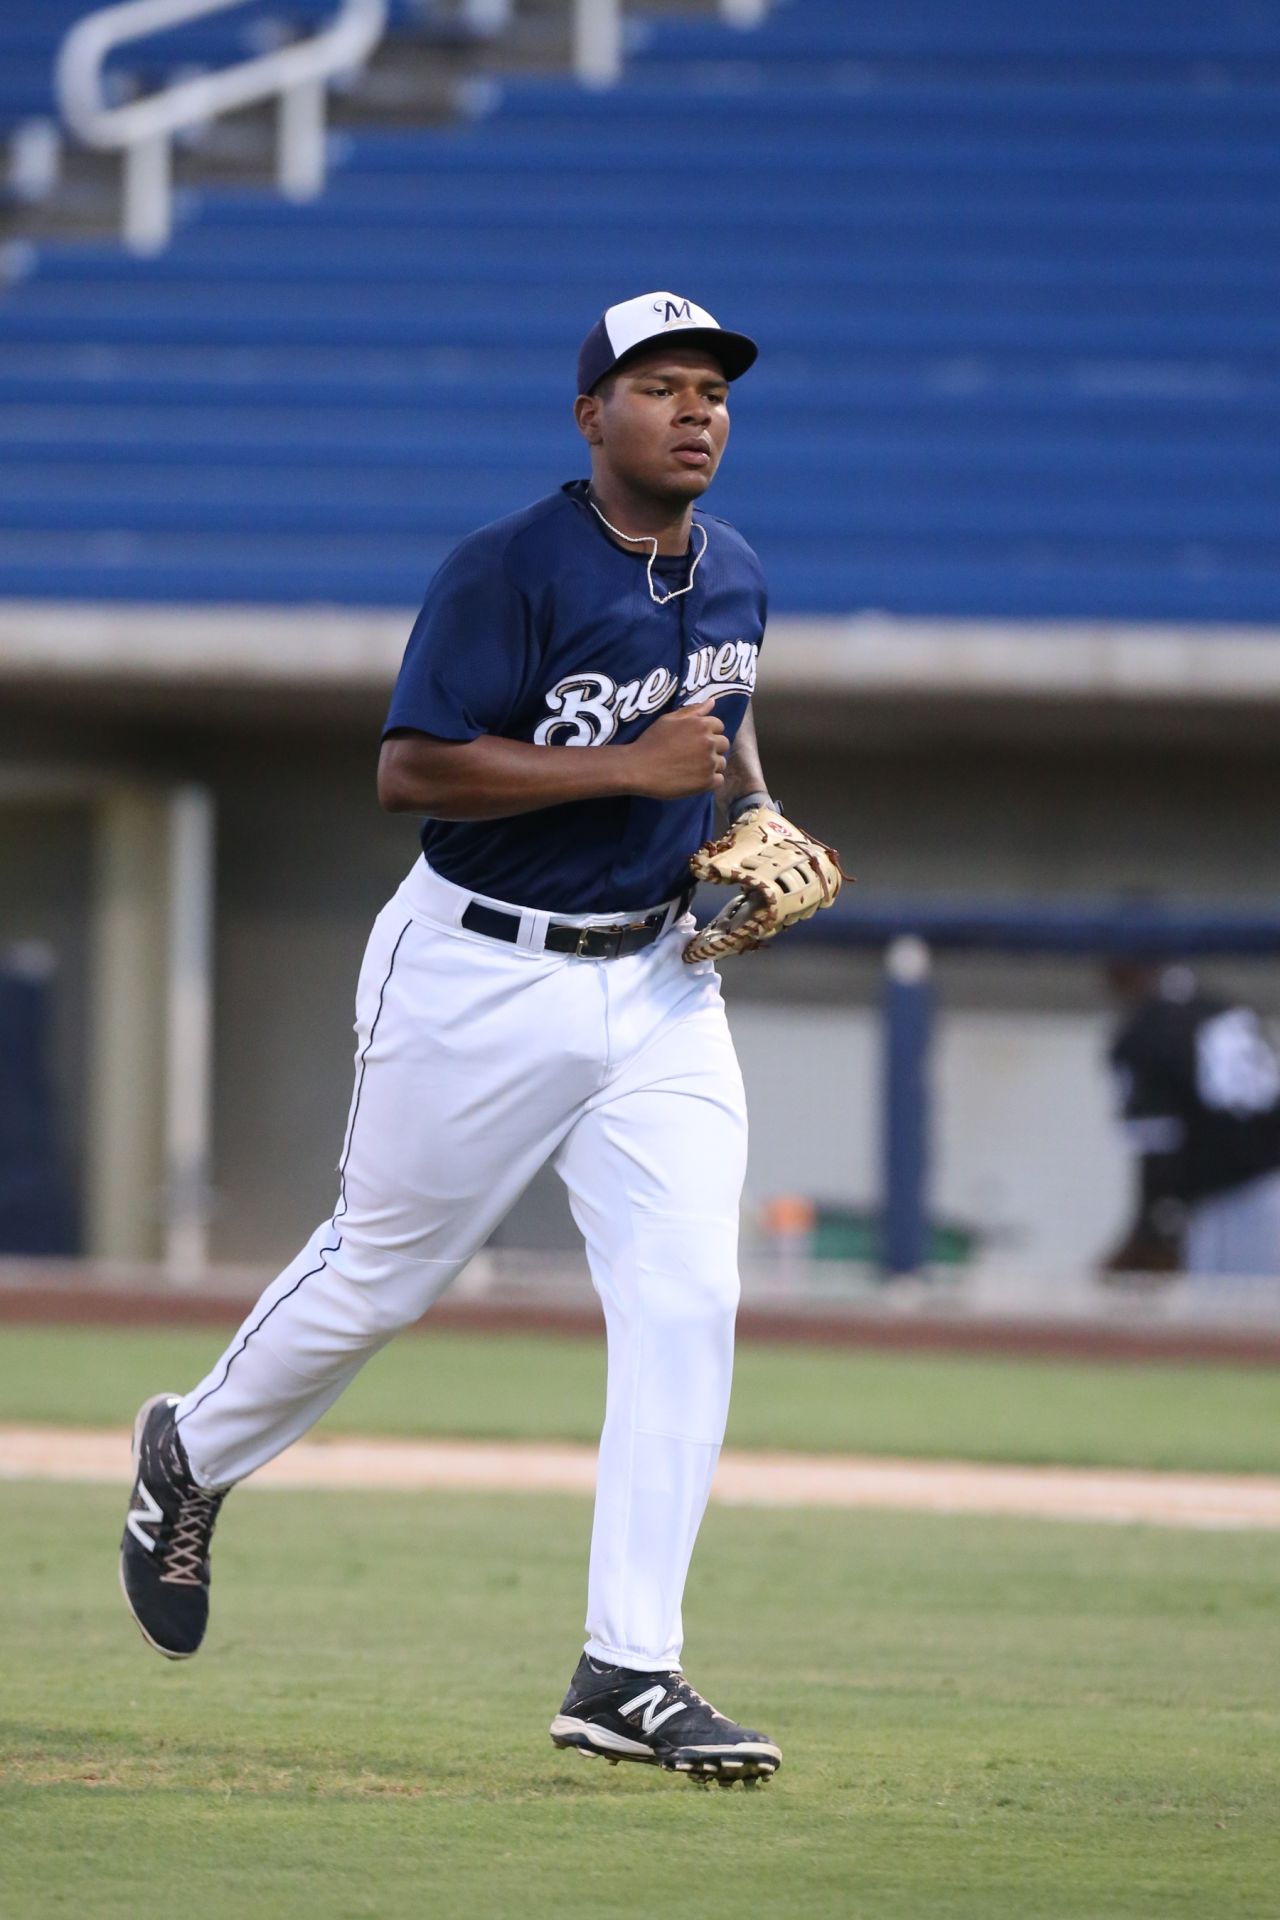 David Denson, a first baseman for the Milwaukee Brewers' rookie affiliate in Helena, Montana, told <a href="http://www.cnn.com/2015/08/16/us/david-denson-baseball-gay-feat/index.html">the Milwaukee Journal Sentinel in August 2015</a> that he is gay. The news makes him the first active player affiliated with a Major League organization to come out publicly. Click through to see other openly gay athletes.